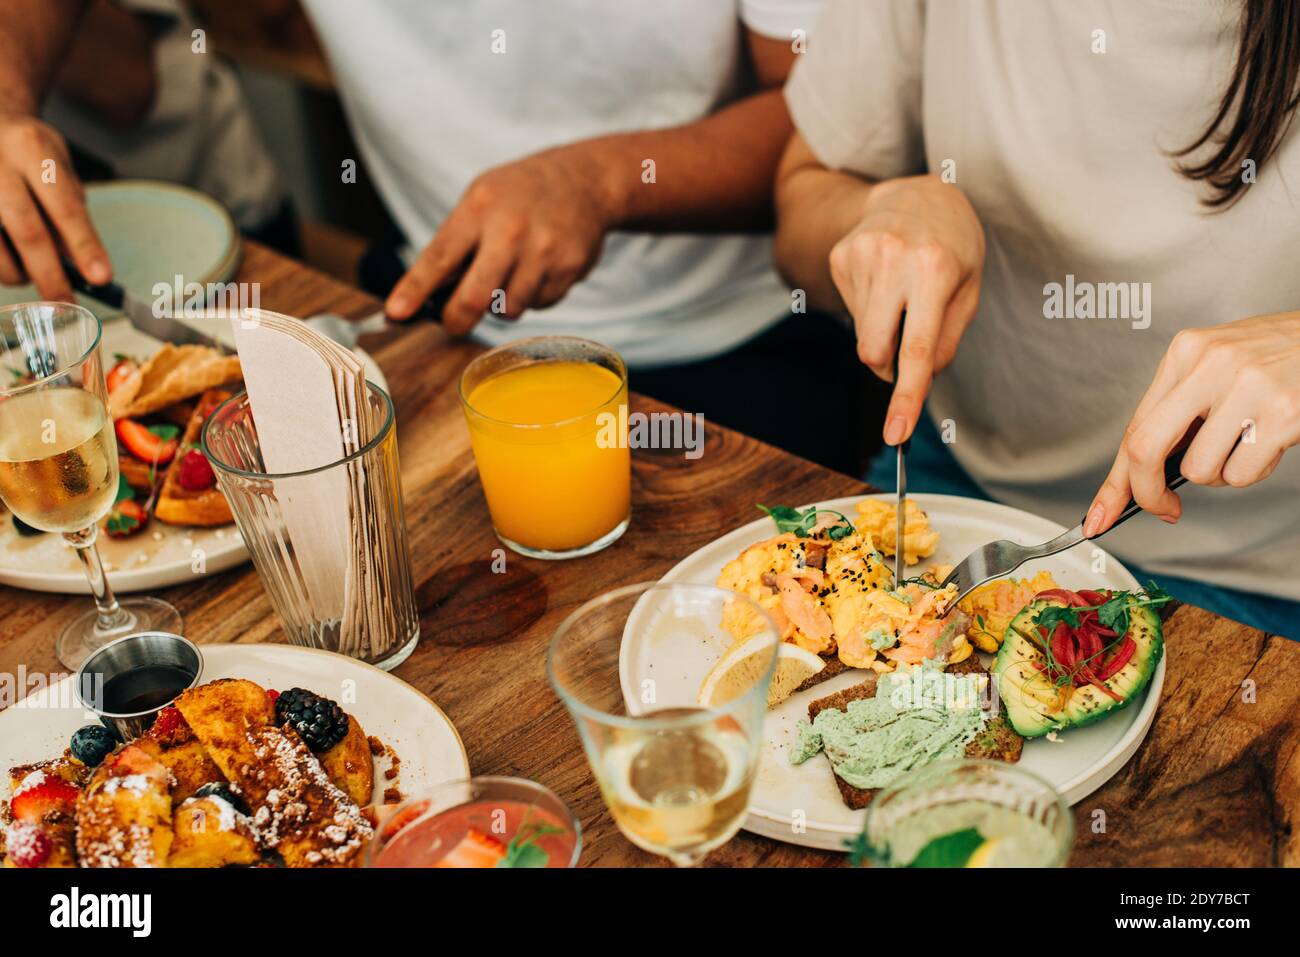 Group of people eating breakfast or brunch at table in cafe Stock Photo